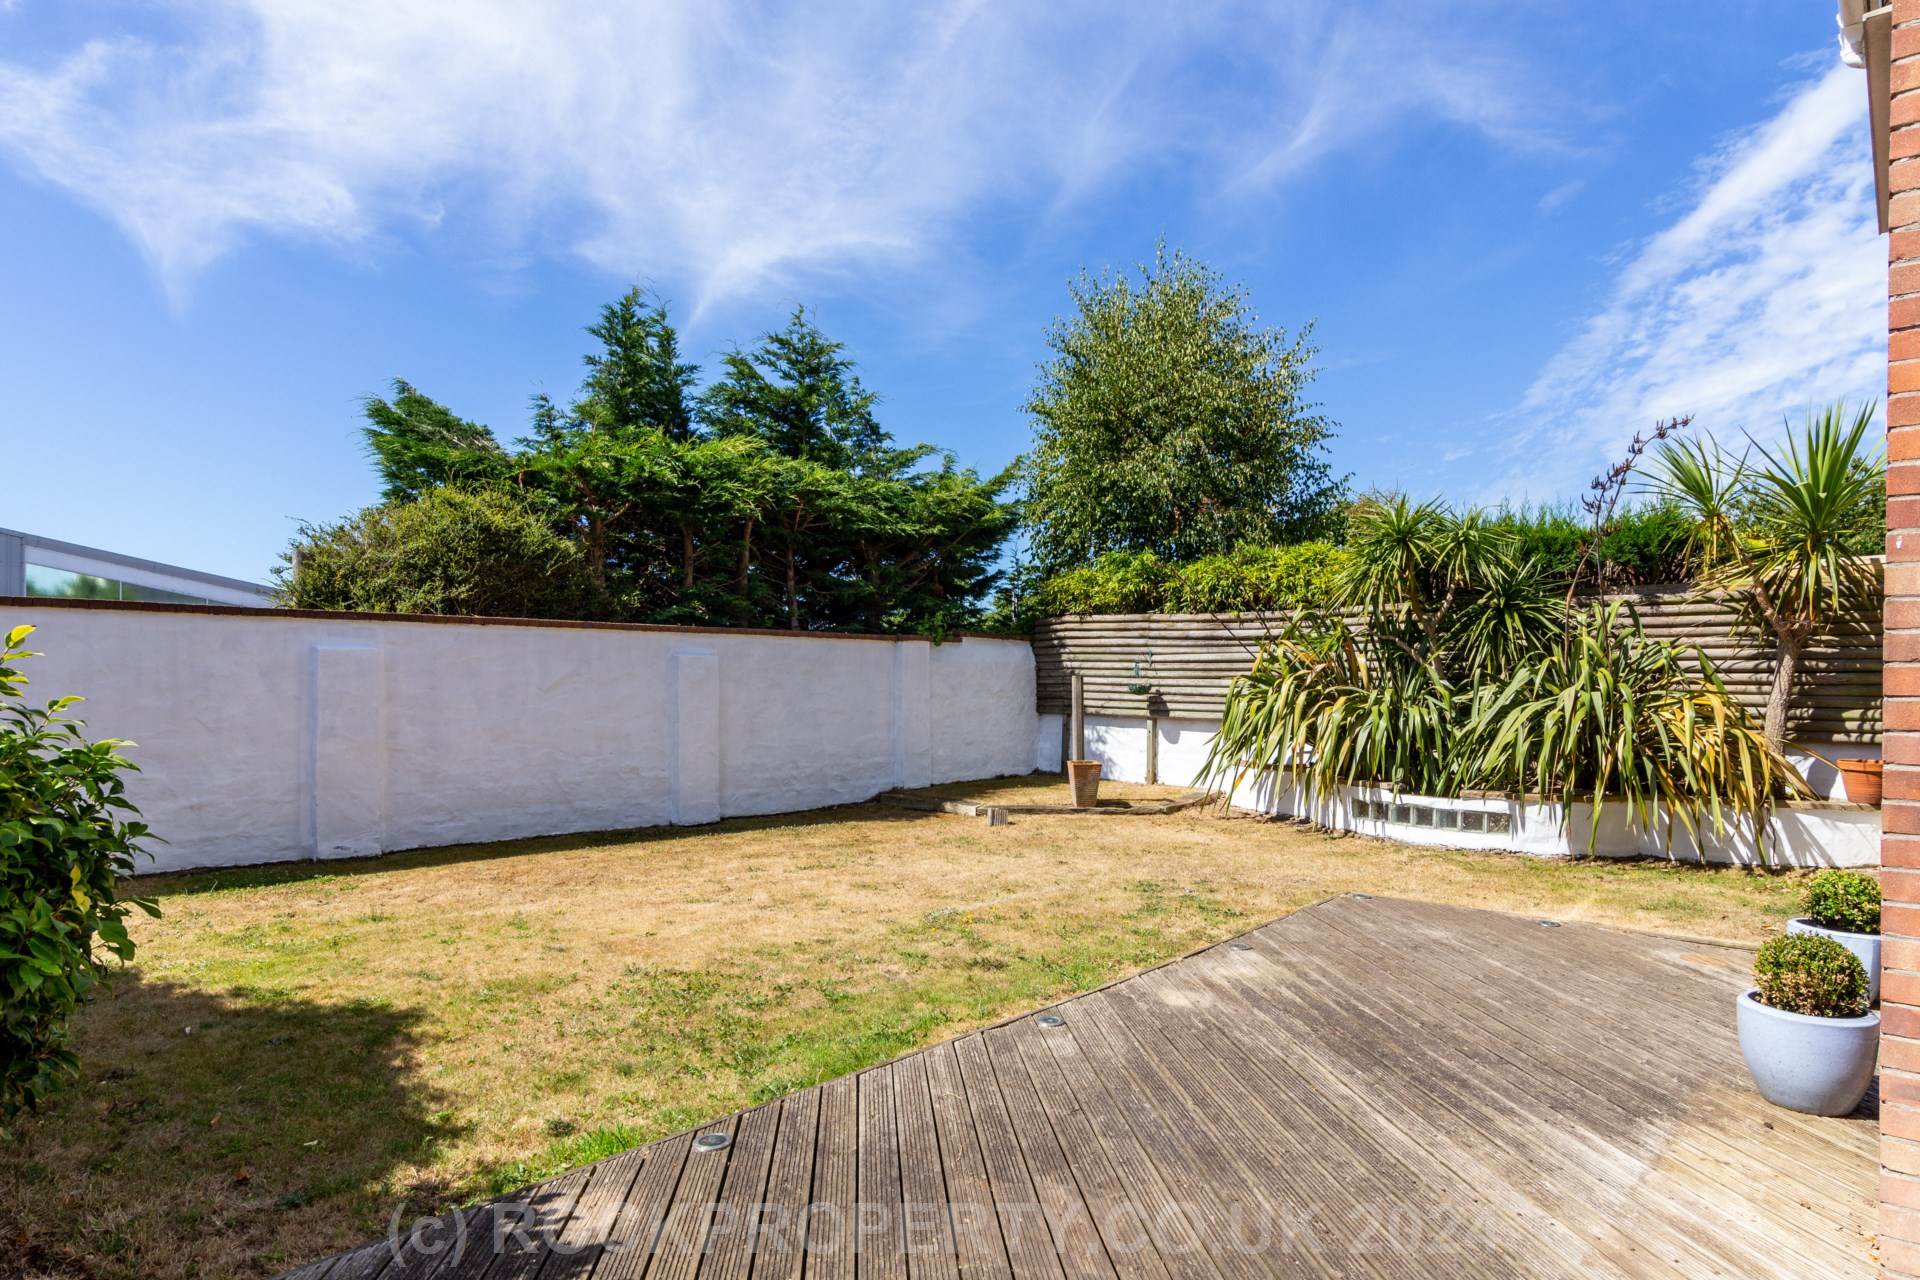 SUBSTANTIAL 3/4 BED FAMILY HOUSE, Outskirts of St Helier, Image 2